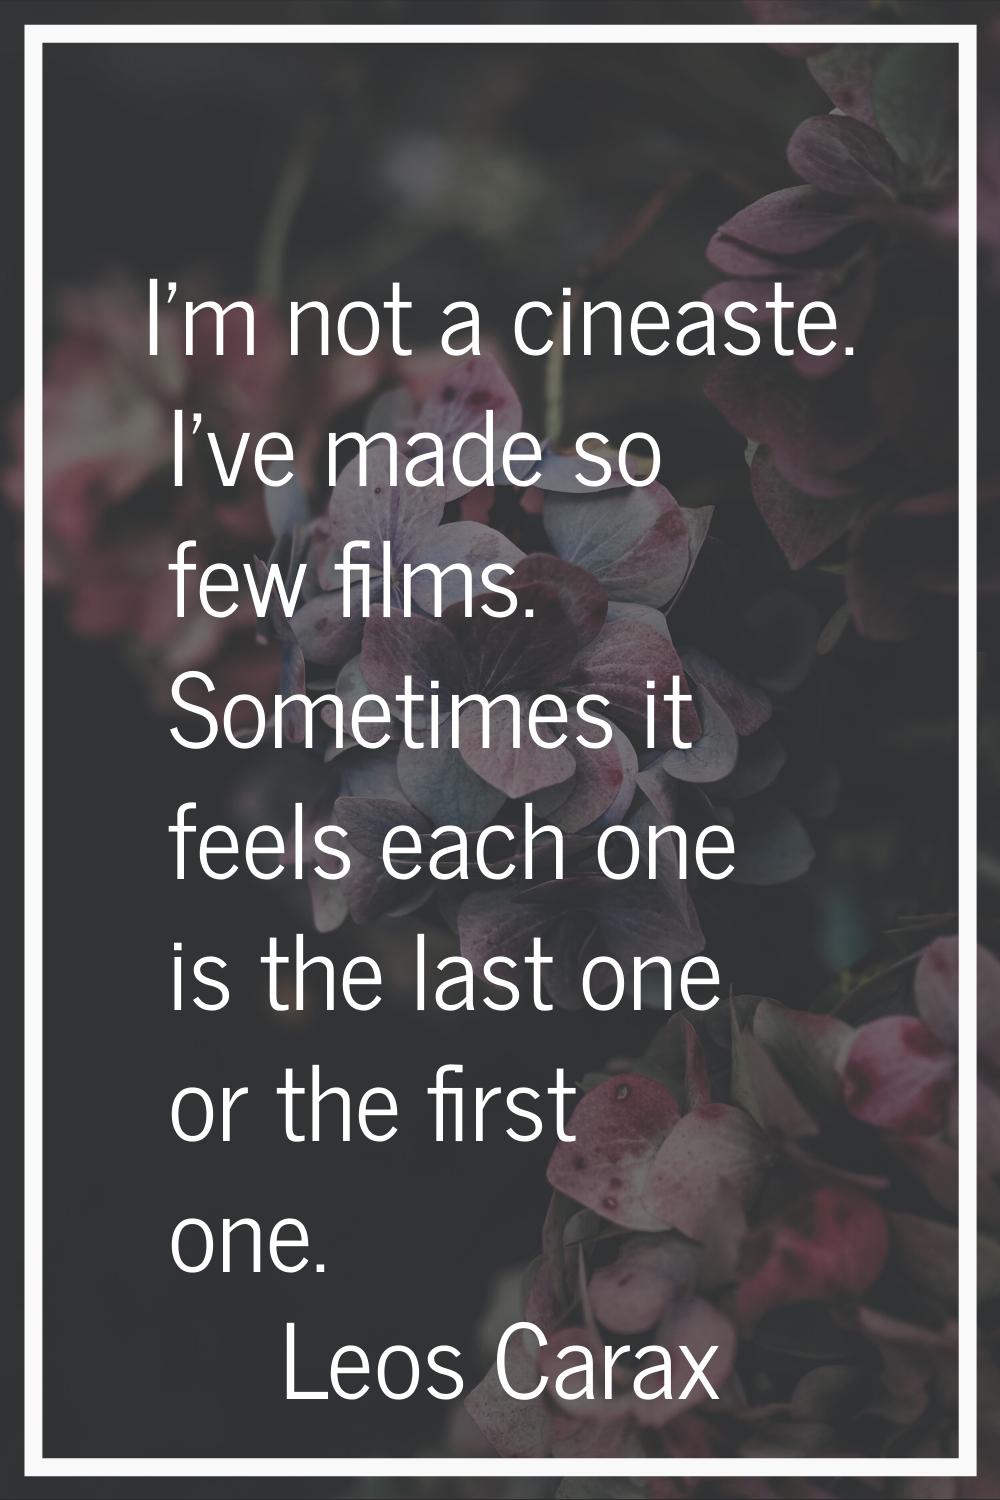 I'm not a cineaste. I've made so few films. Sometimes it feels each one is the last one or the firs